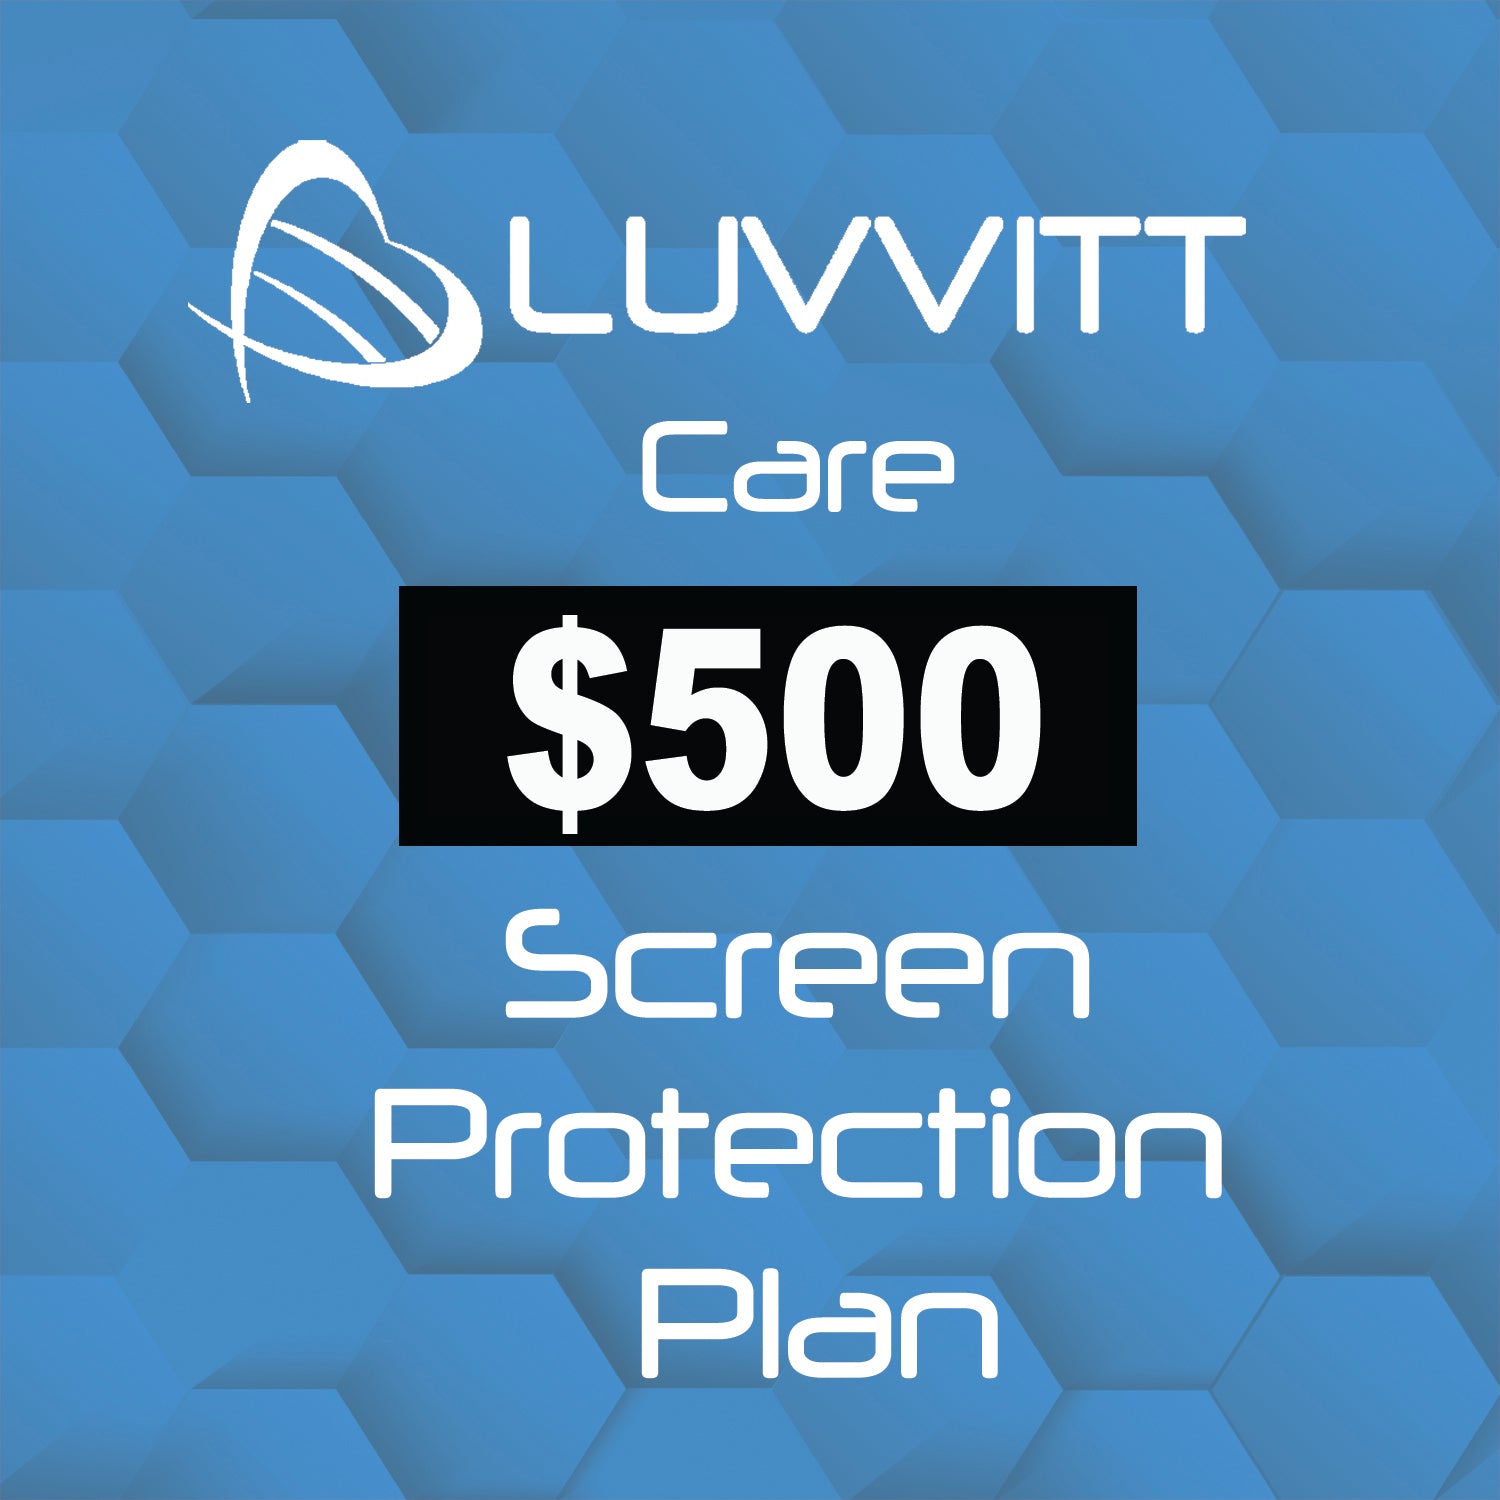 Luvvitt Care $500 Screen Protection Coverage for all Mobile Devices